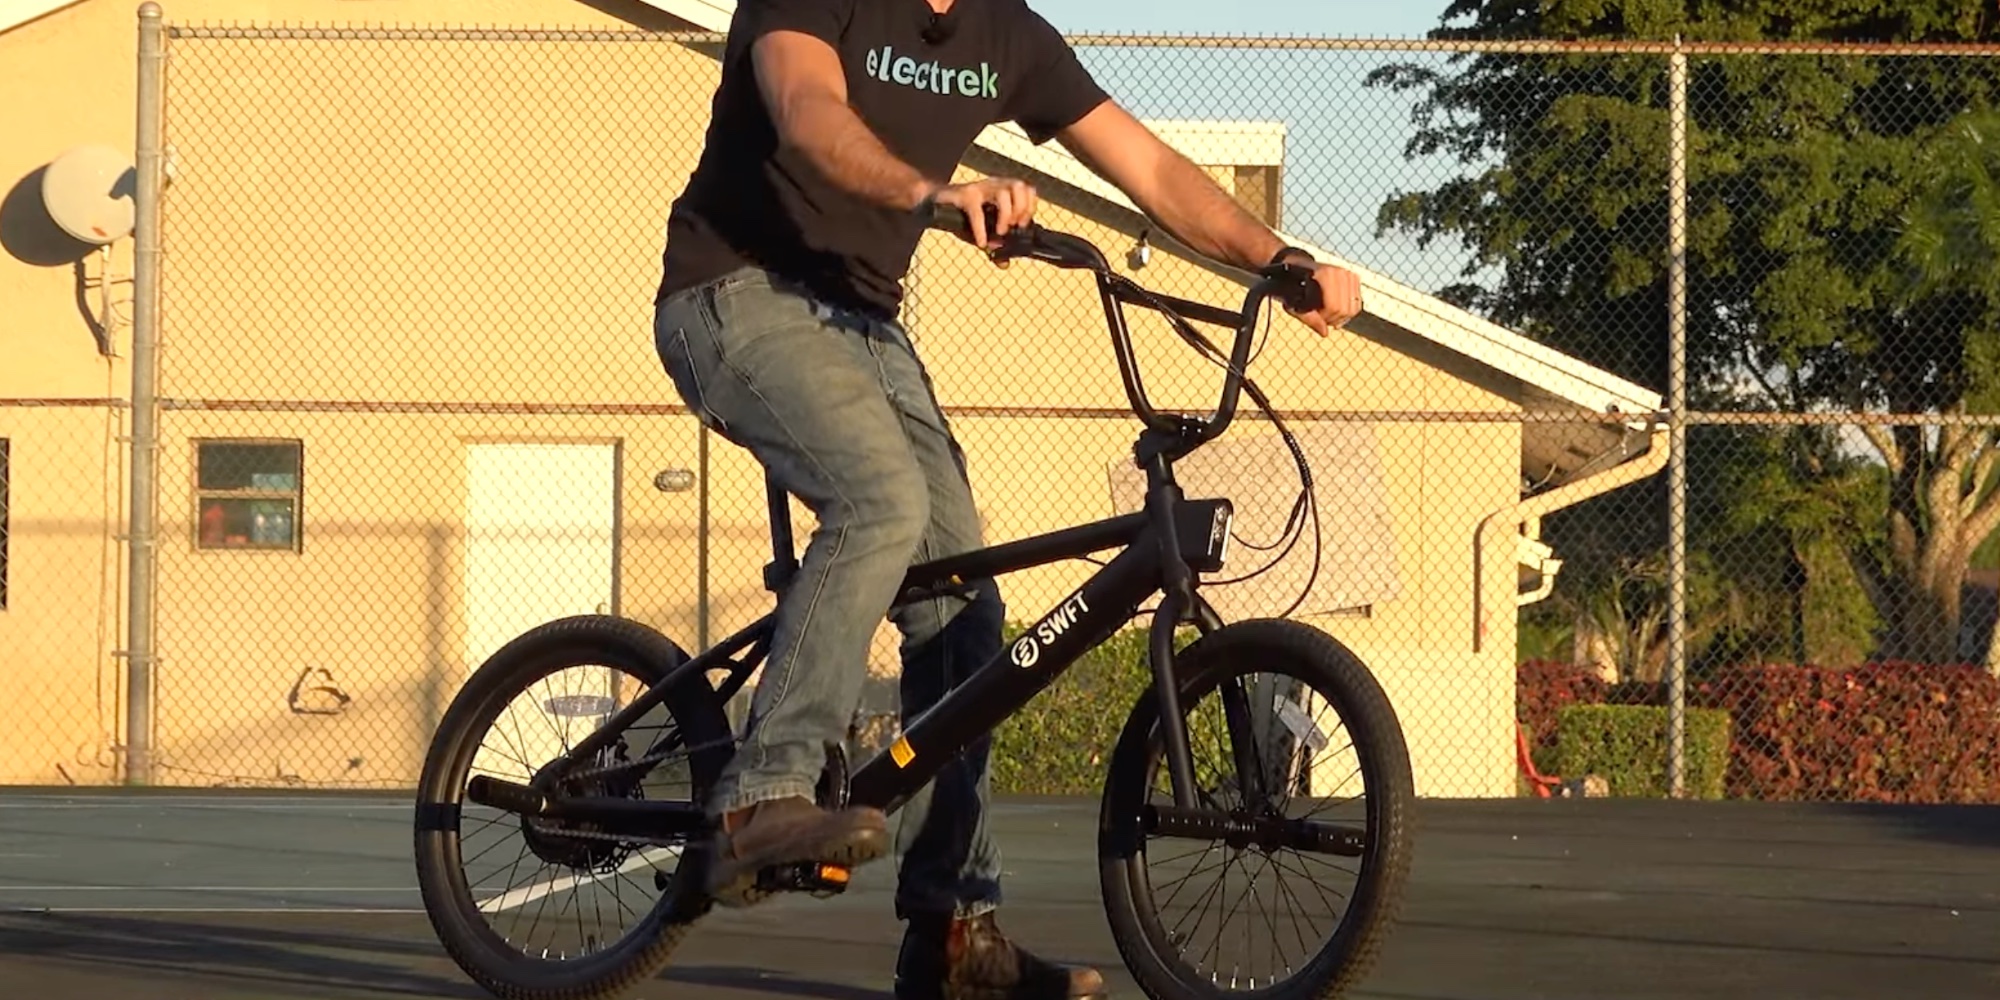 SWFT BMX e-bike sees $500 discount down to $500 low